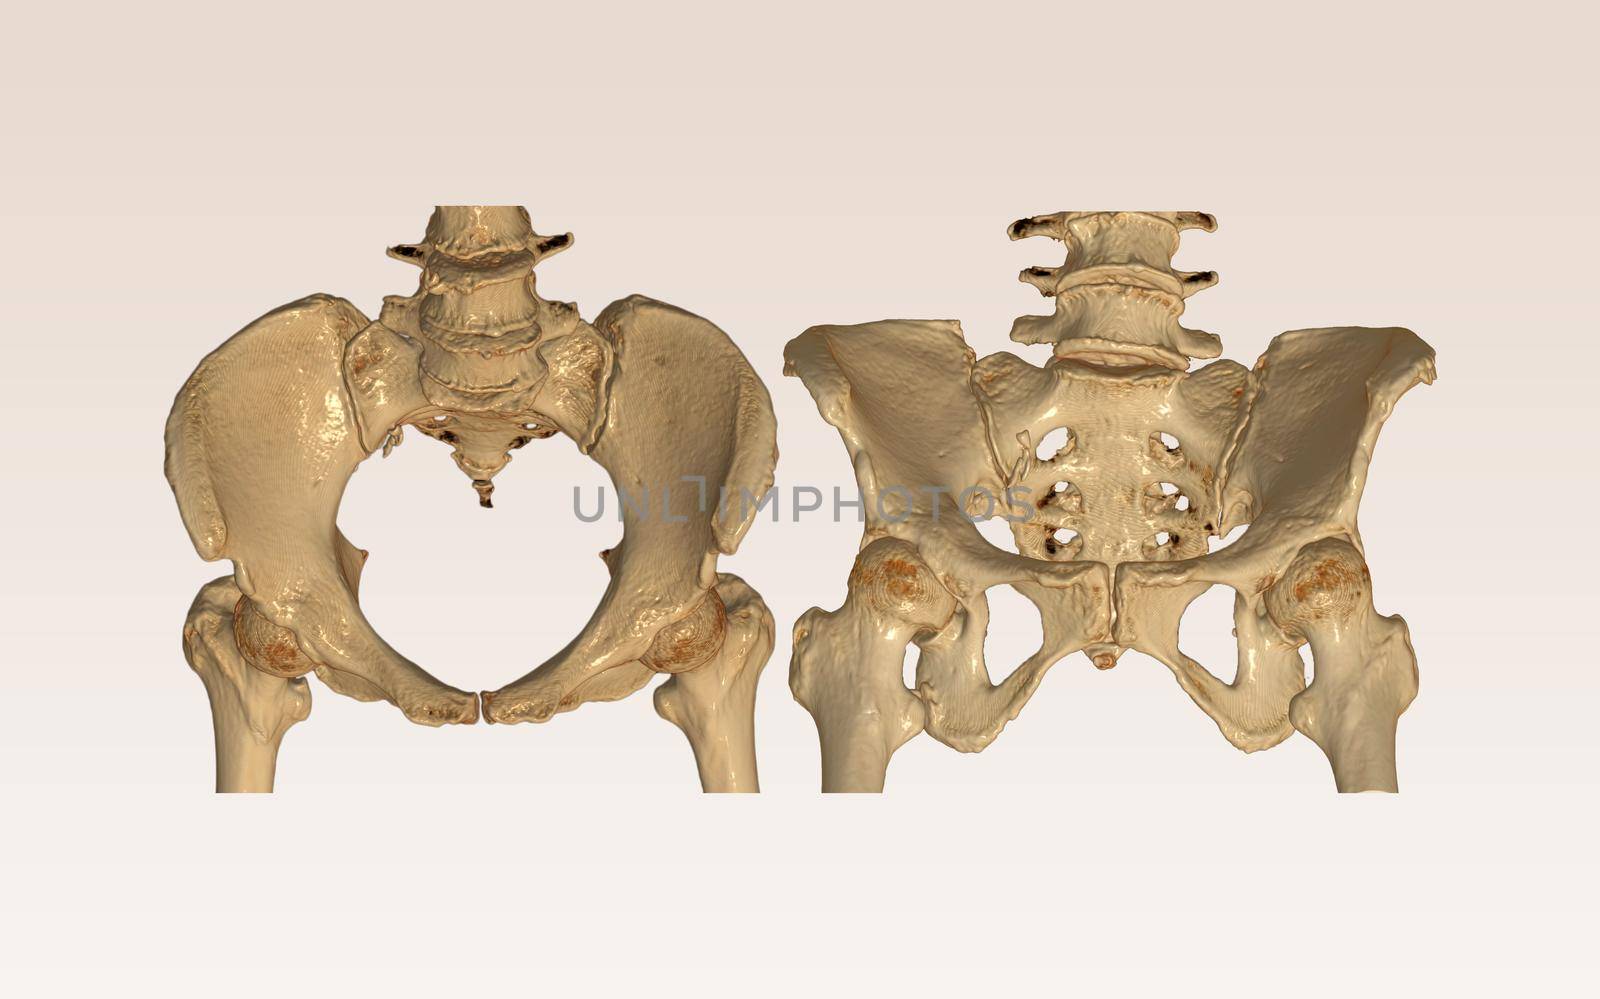 Compare of CT Scan pelvic bone with both hip joint 3D rendering image Inlet and Outlet view isolated on white background. Clipping path.